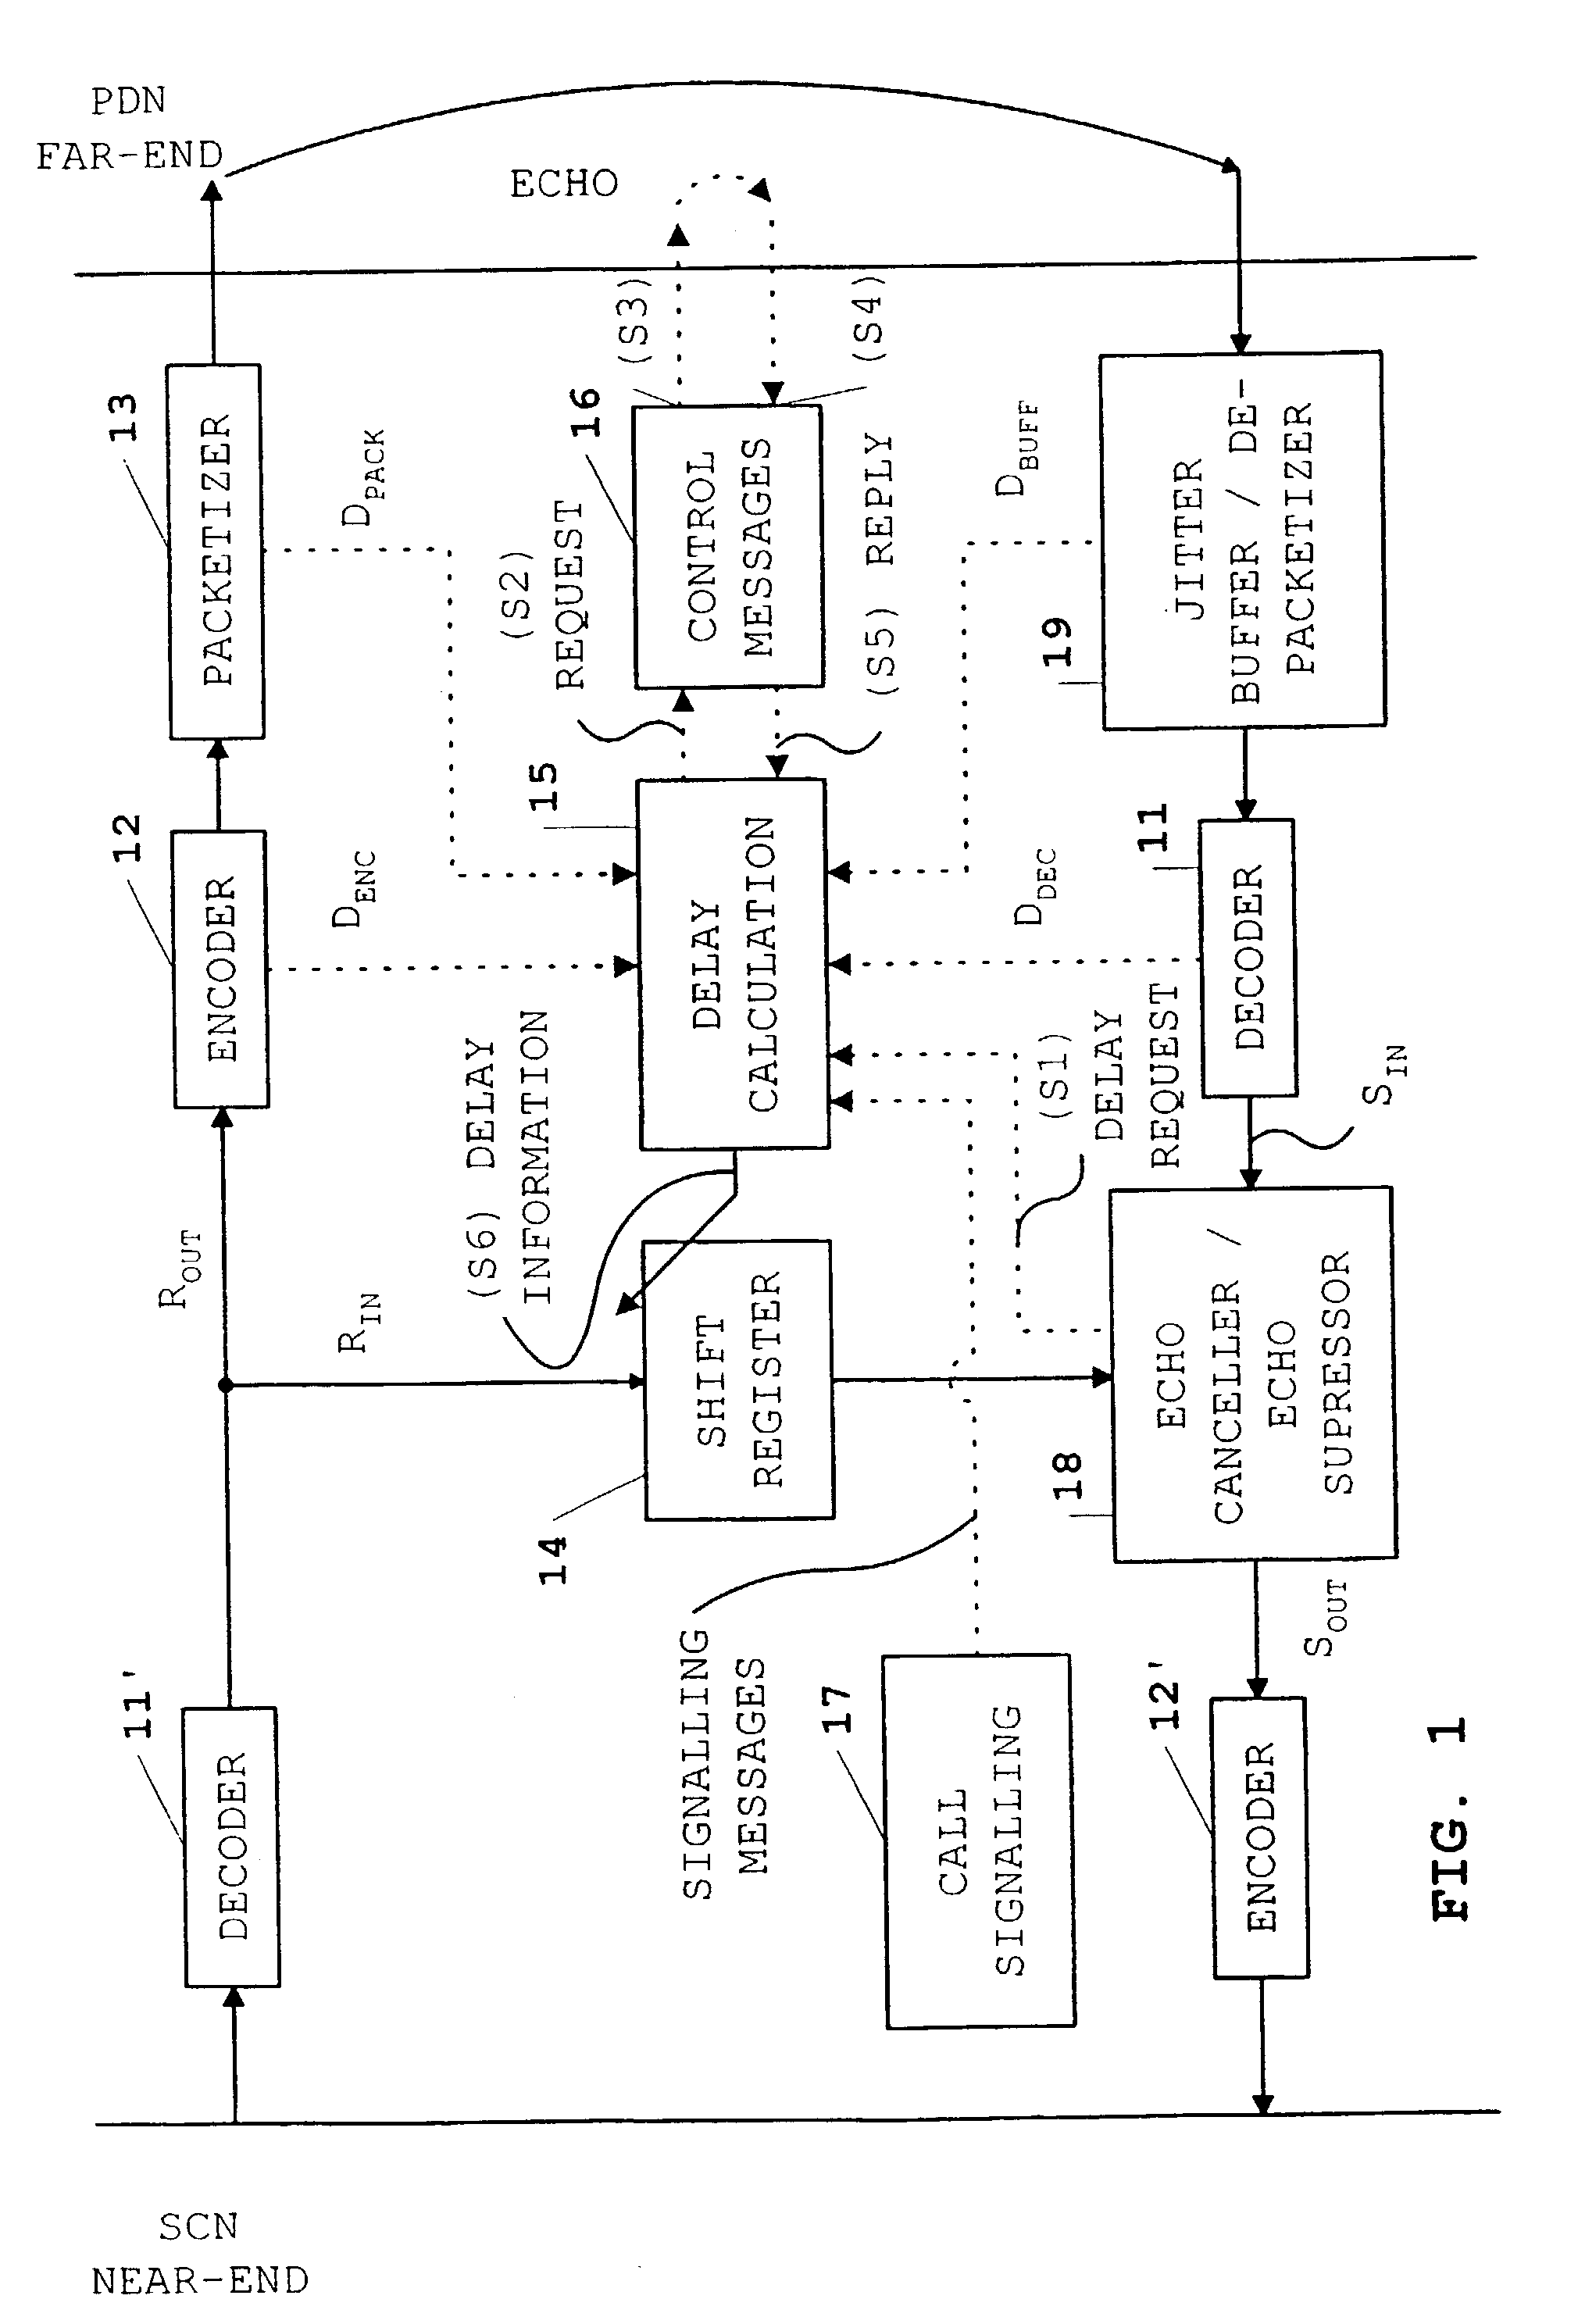 Delay measurement system in a packet network